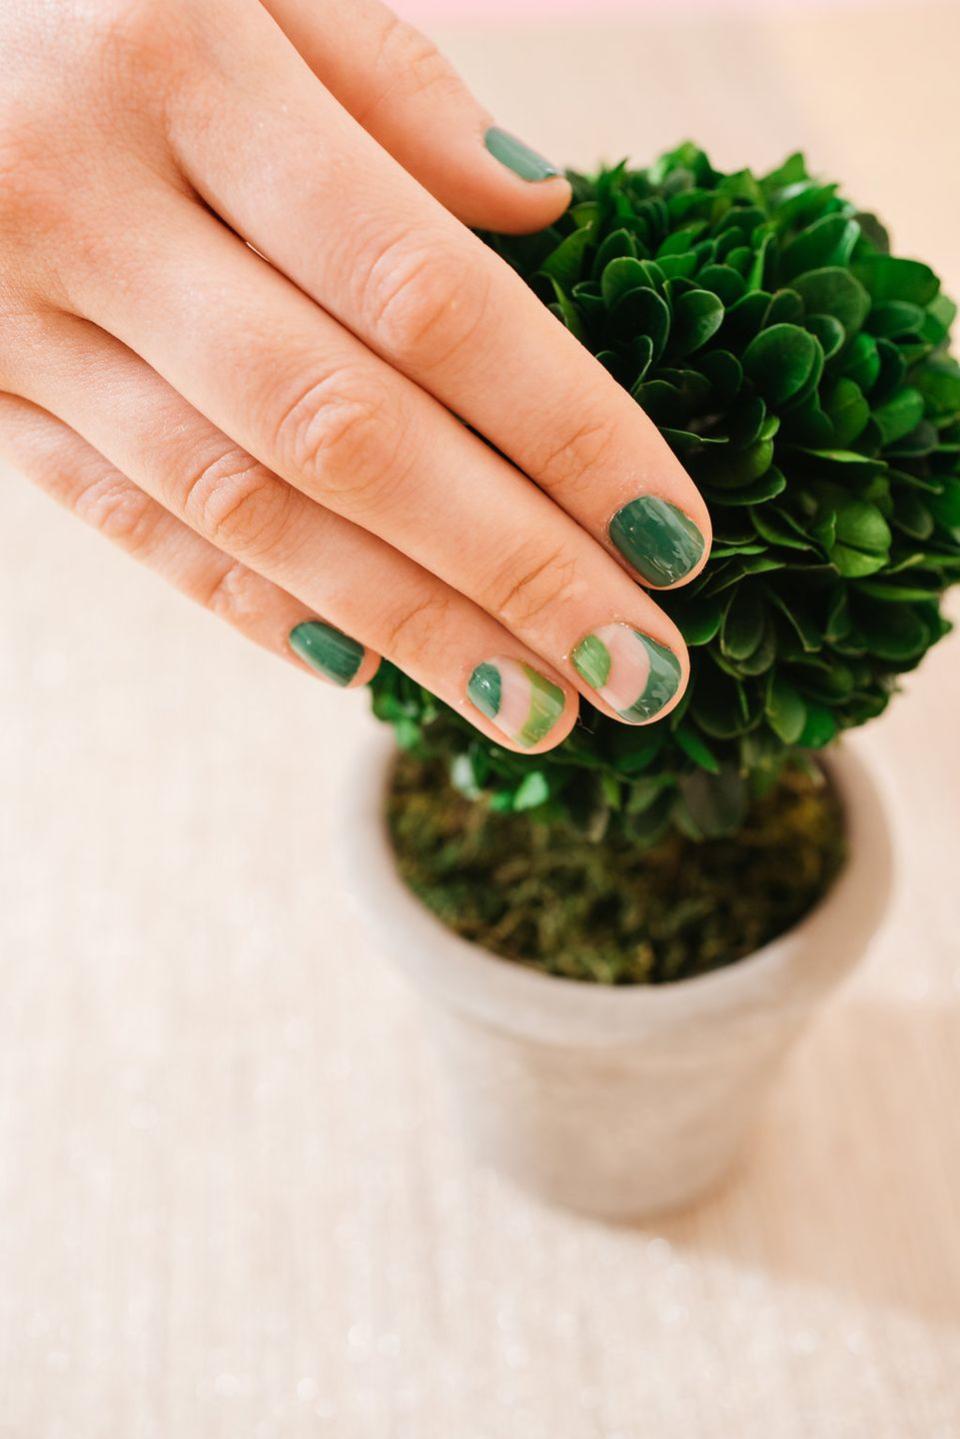 a female hand with green nail polish and a green plant in the background